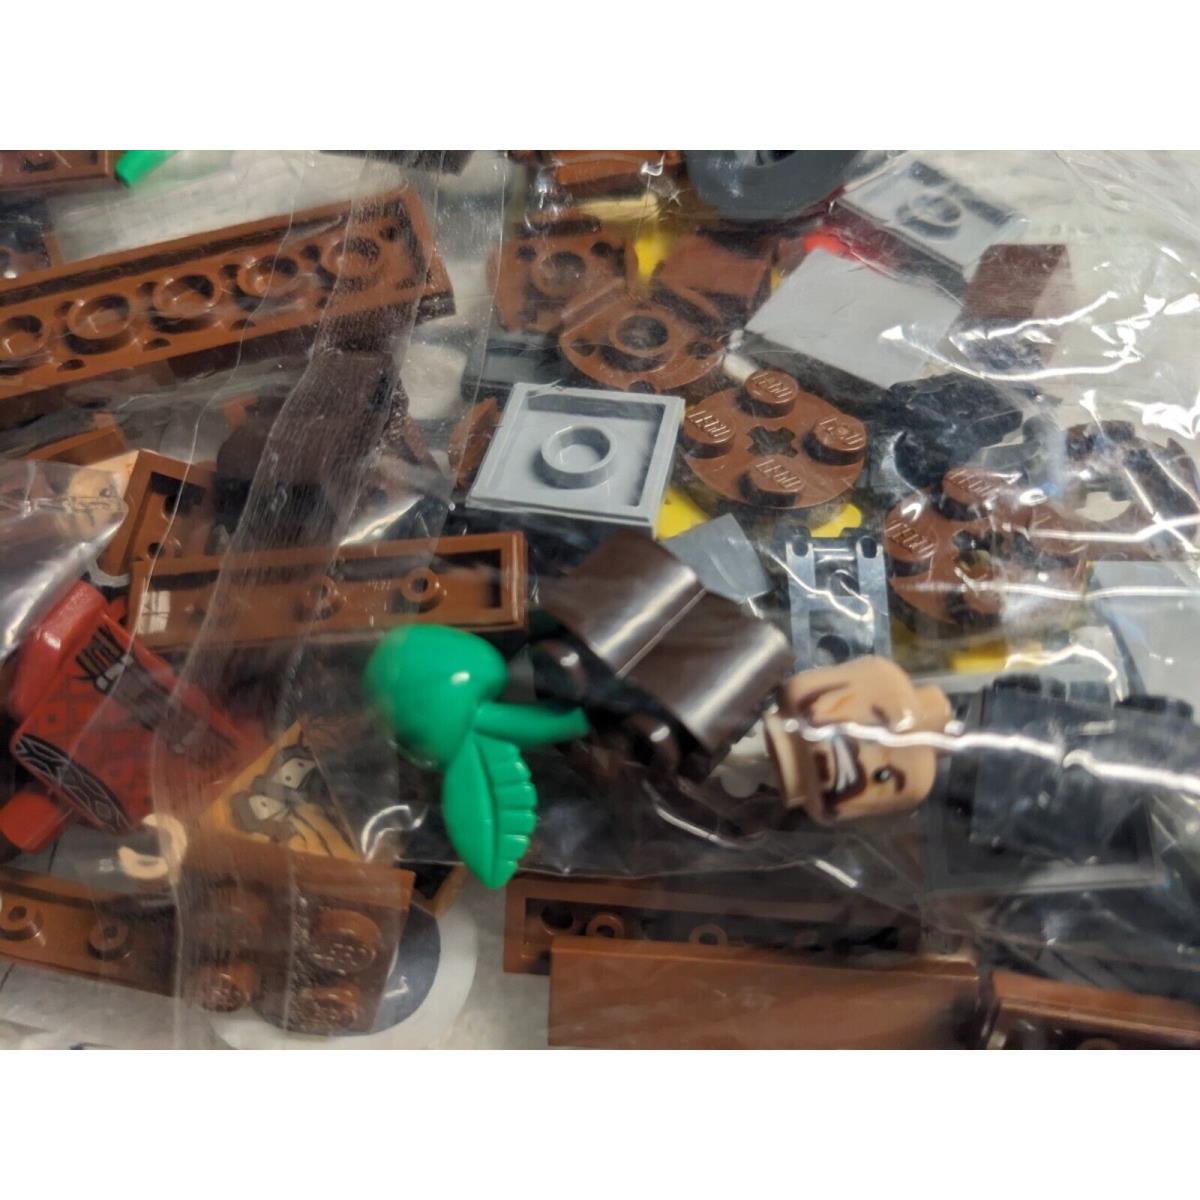 Lego 79003 The Hobbit: An Unexpected Gathering Bag 3 Only Sealed